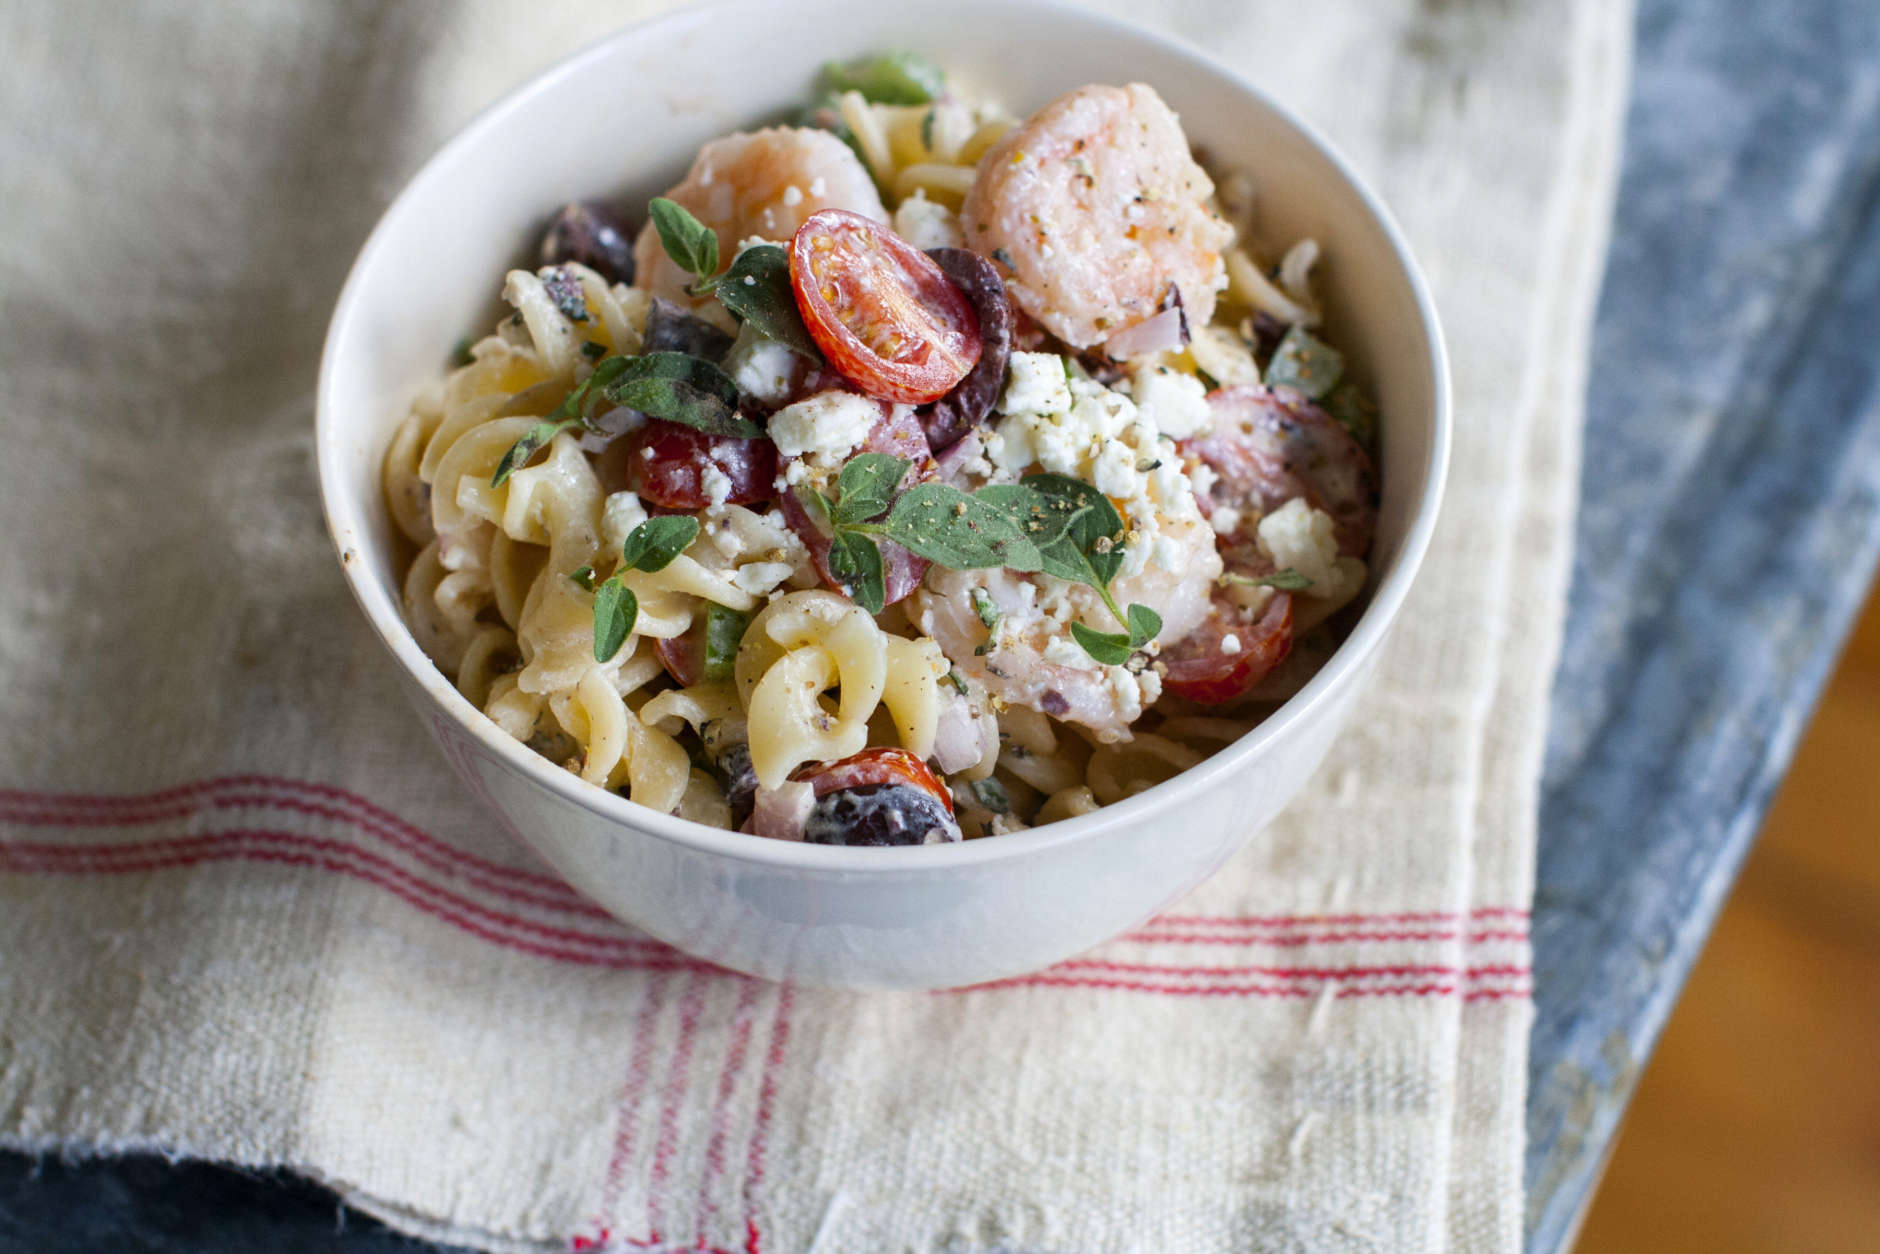 This May 5, 2014 photo shows Greek shrimp and feta pasta salad in Concord, N.H. (AP Photo/Matthew Mead)